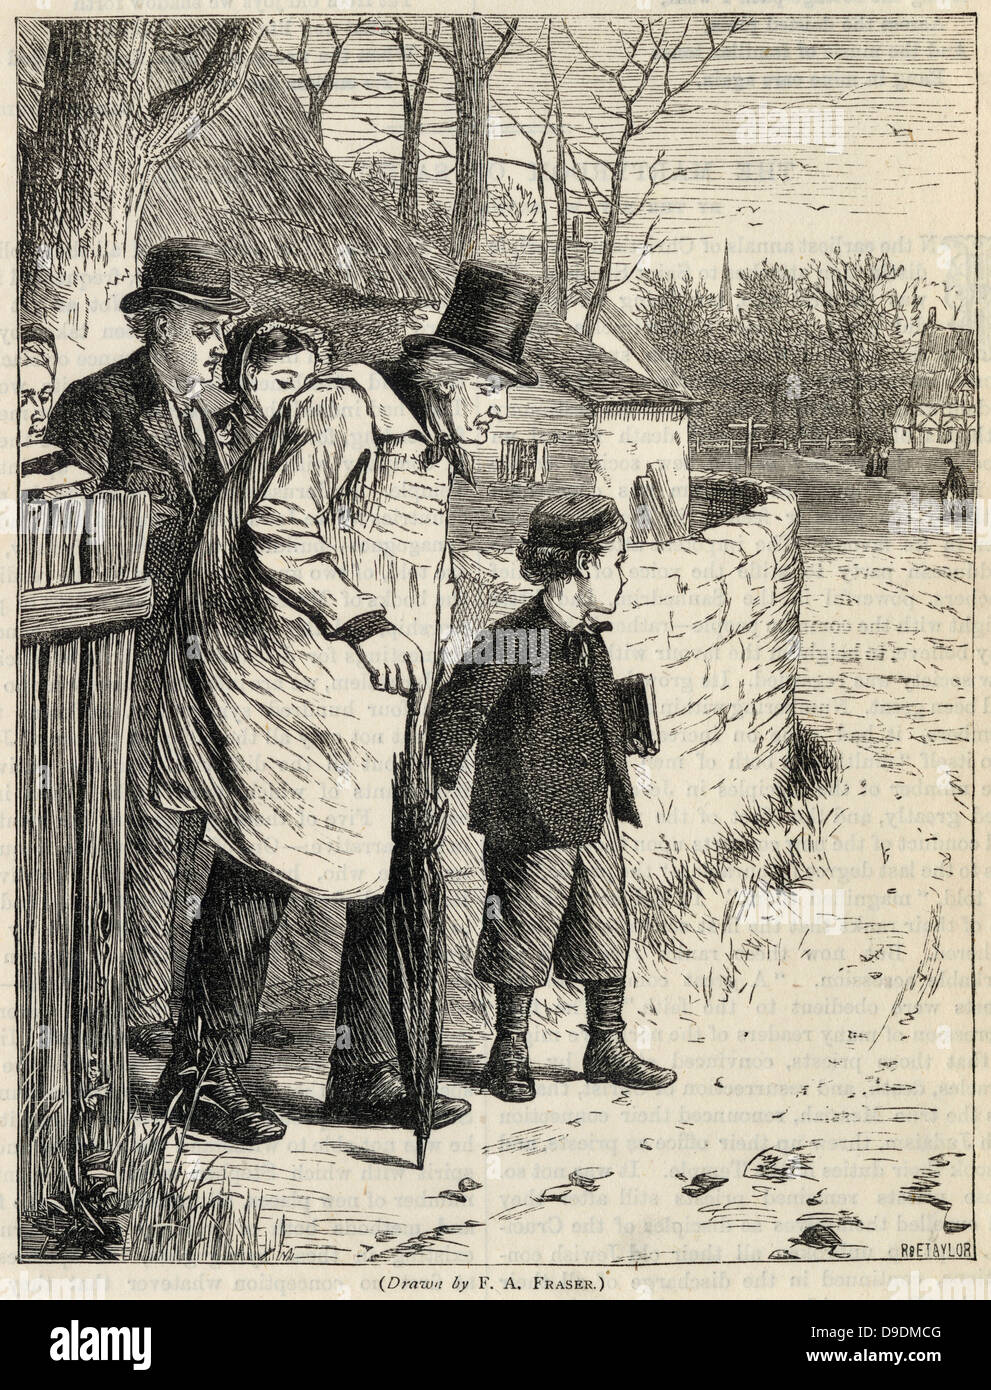 Family of country cottagers setting ou for Sunday morning church service. Engraving, 1876. Stock Photo